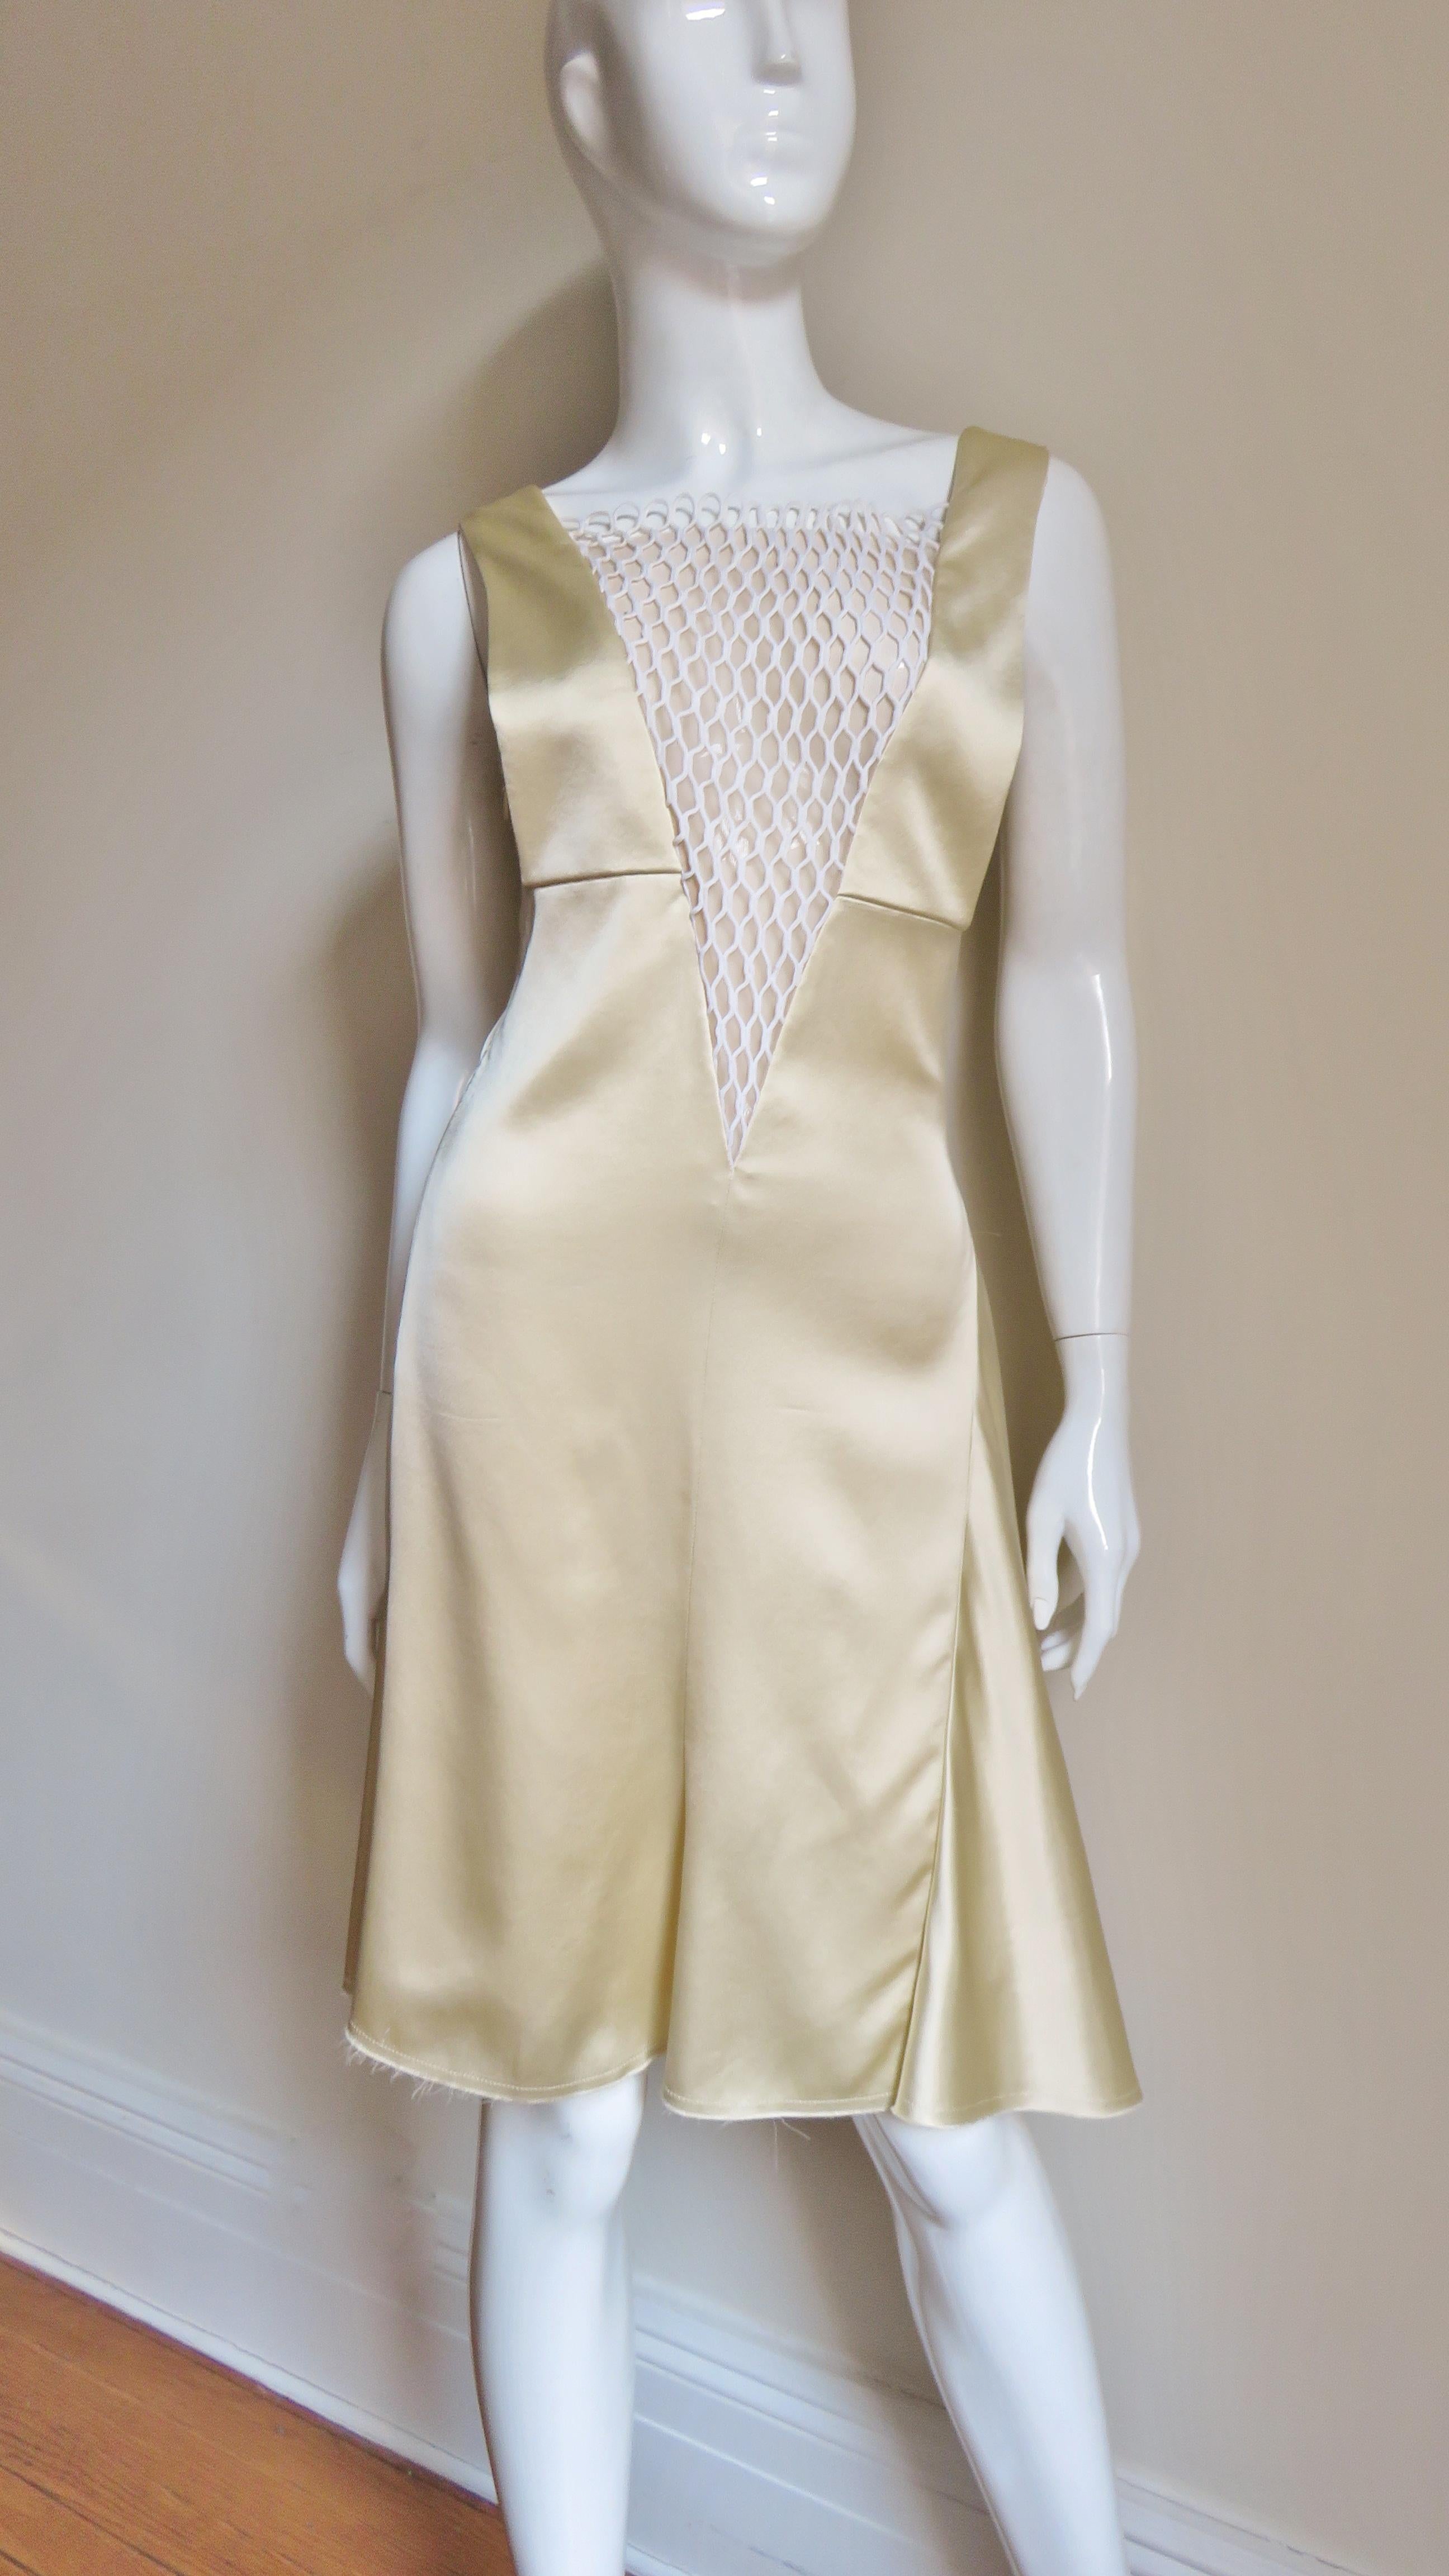 A gorgeous light golden yellow silk dress from Celine.  It has a deep plunging to the waist V neck with nude mesh under white netting. The bodice is fitted, the skirt is fuller with gores at the side and center back.  It is fully lined in matching